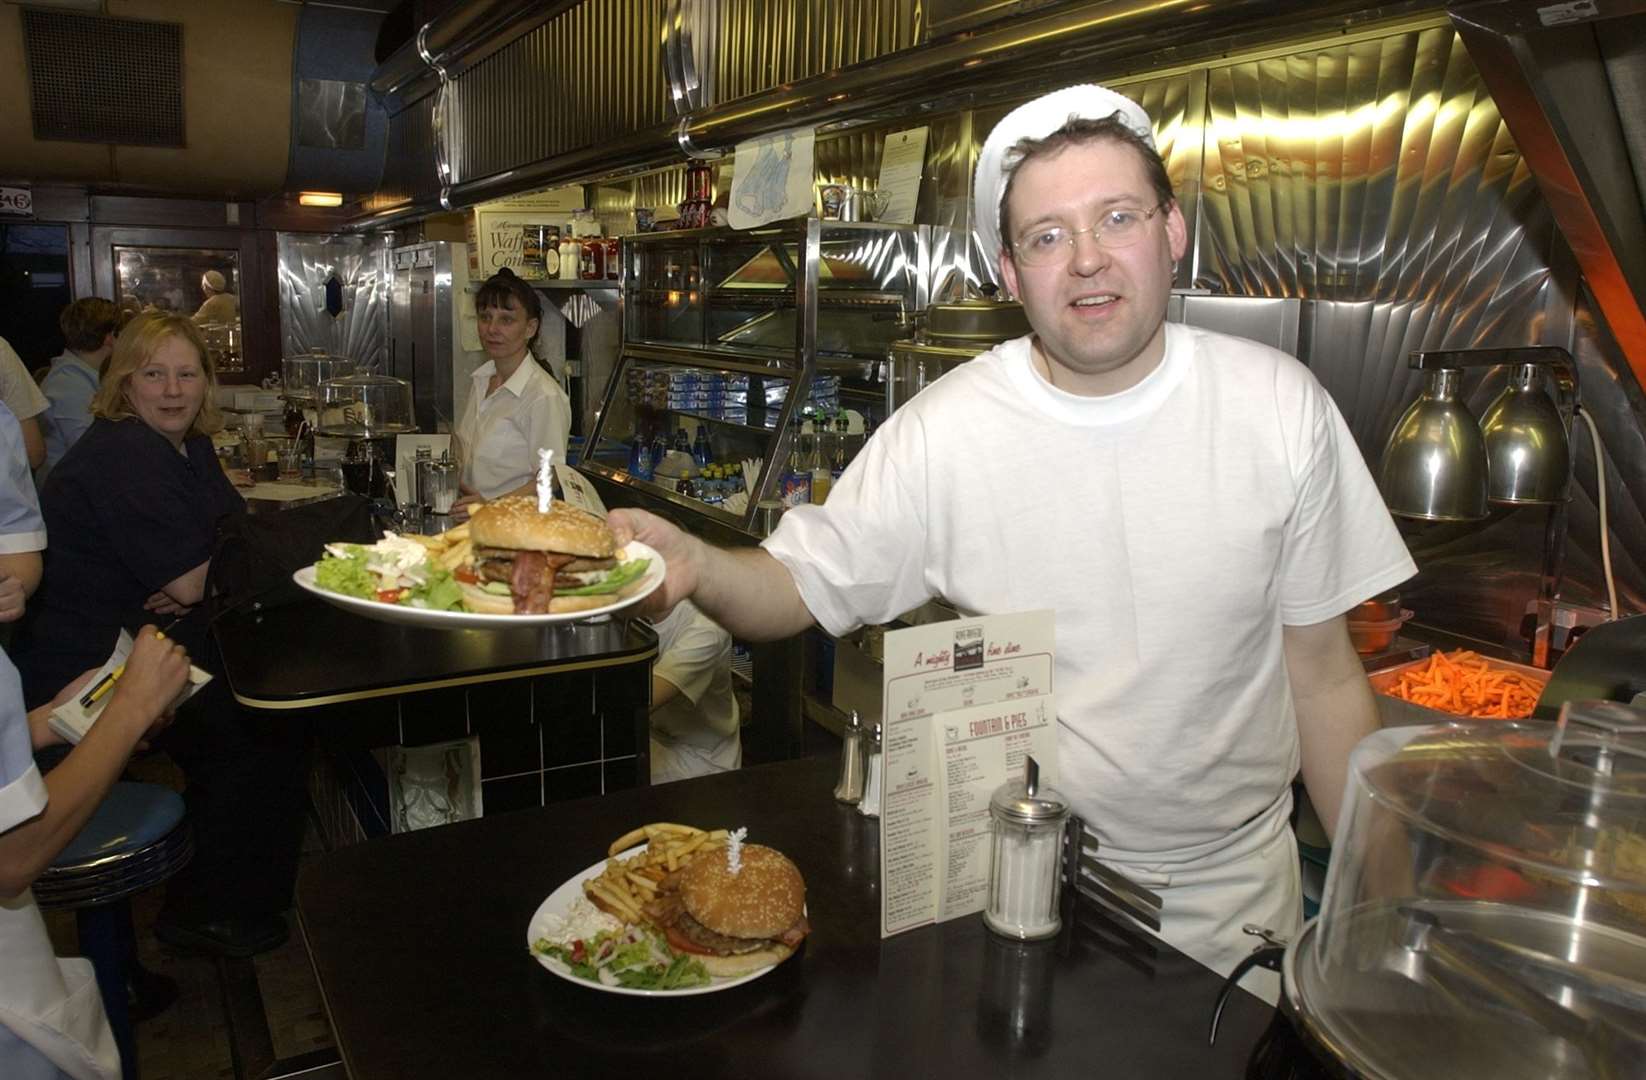 Neil Collins serving burgers in the former American diner next to Bybrook Barn in April 2002